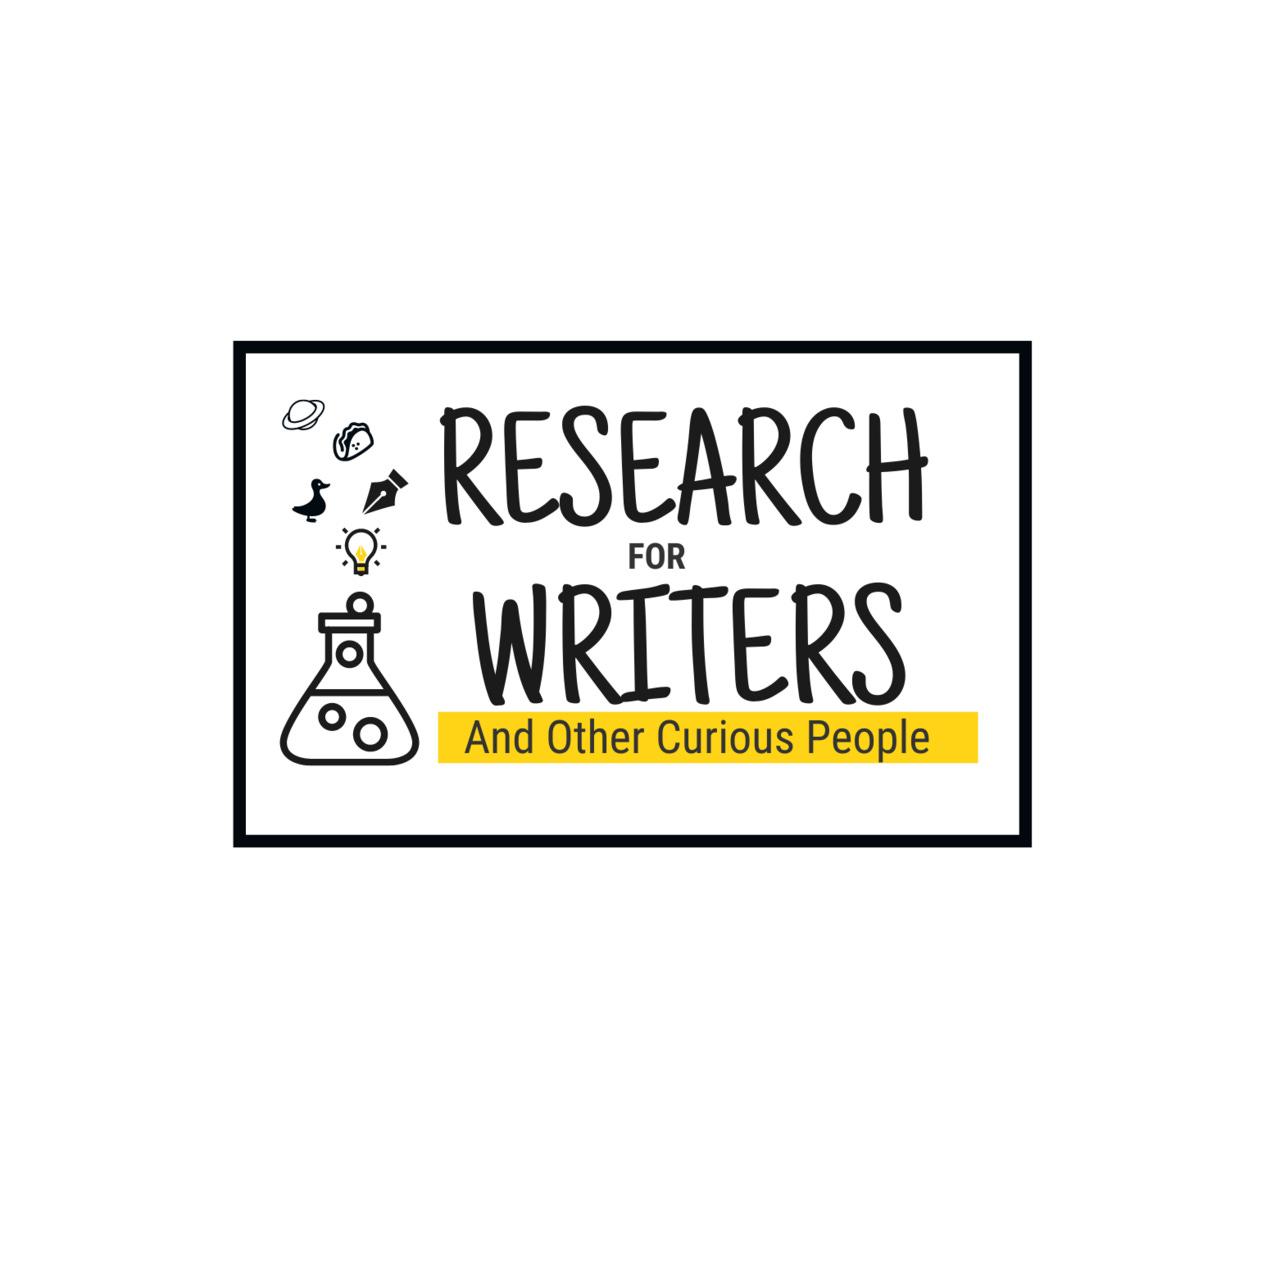 Research for Writers and Other Curious People